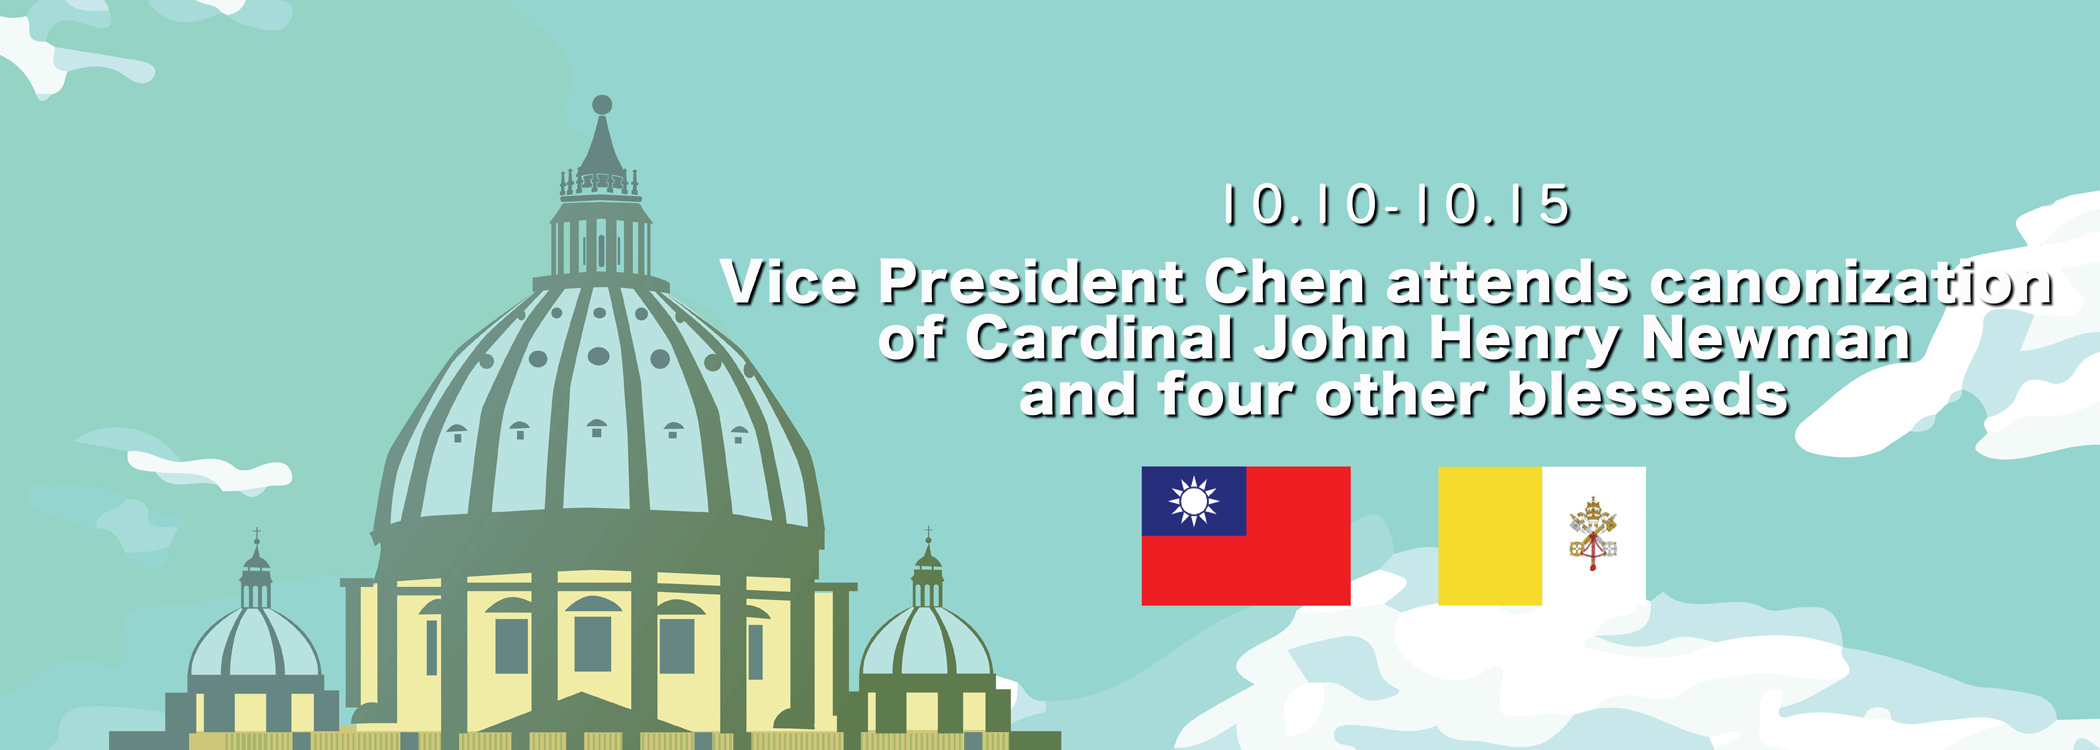 Vice President Chen attends canonization of Cardinal John Henry Newman and four other blesseds